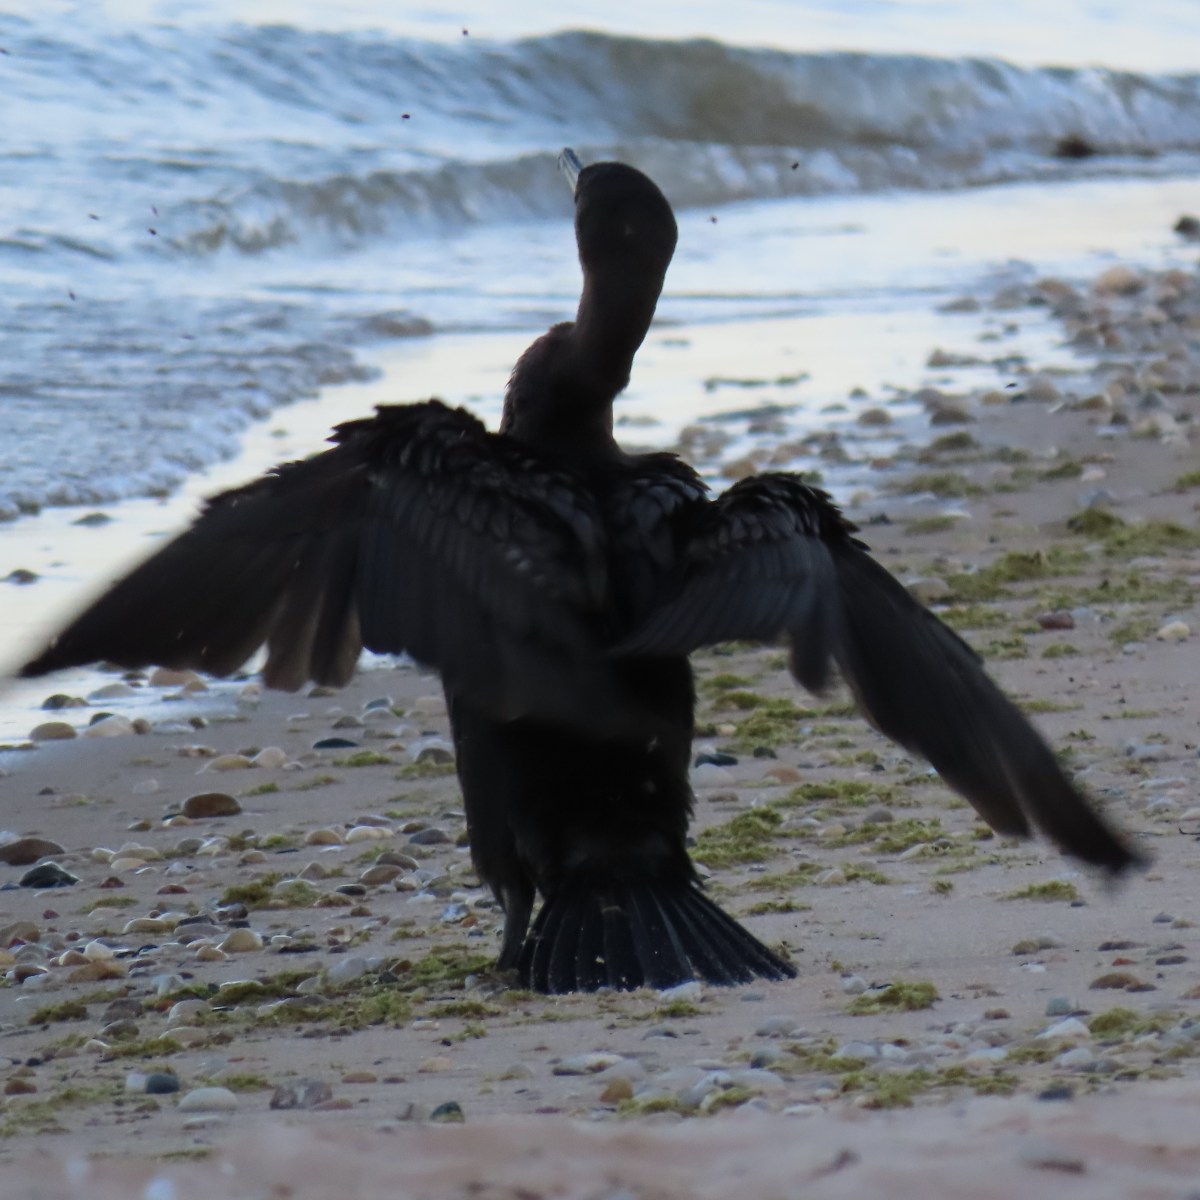 Cormorant on beach with outspread wings